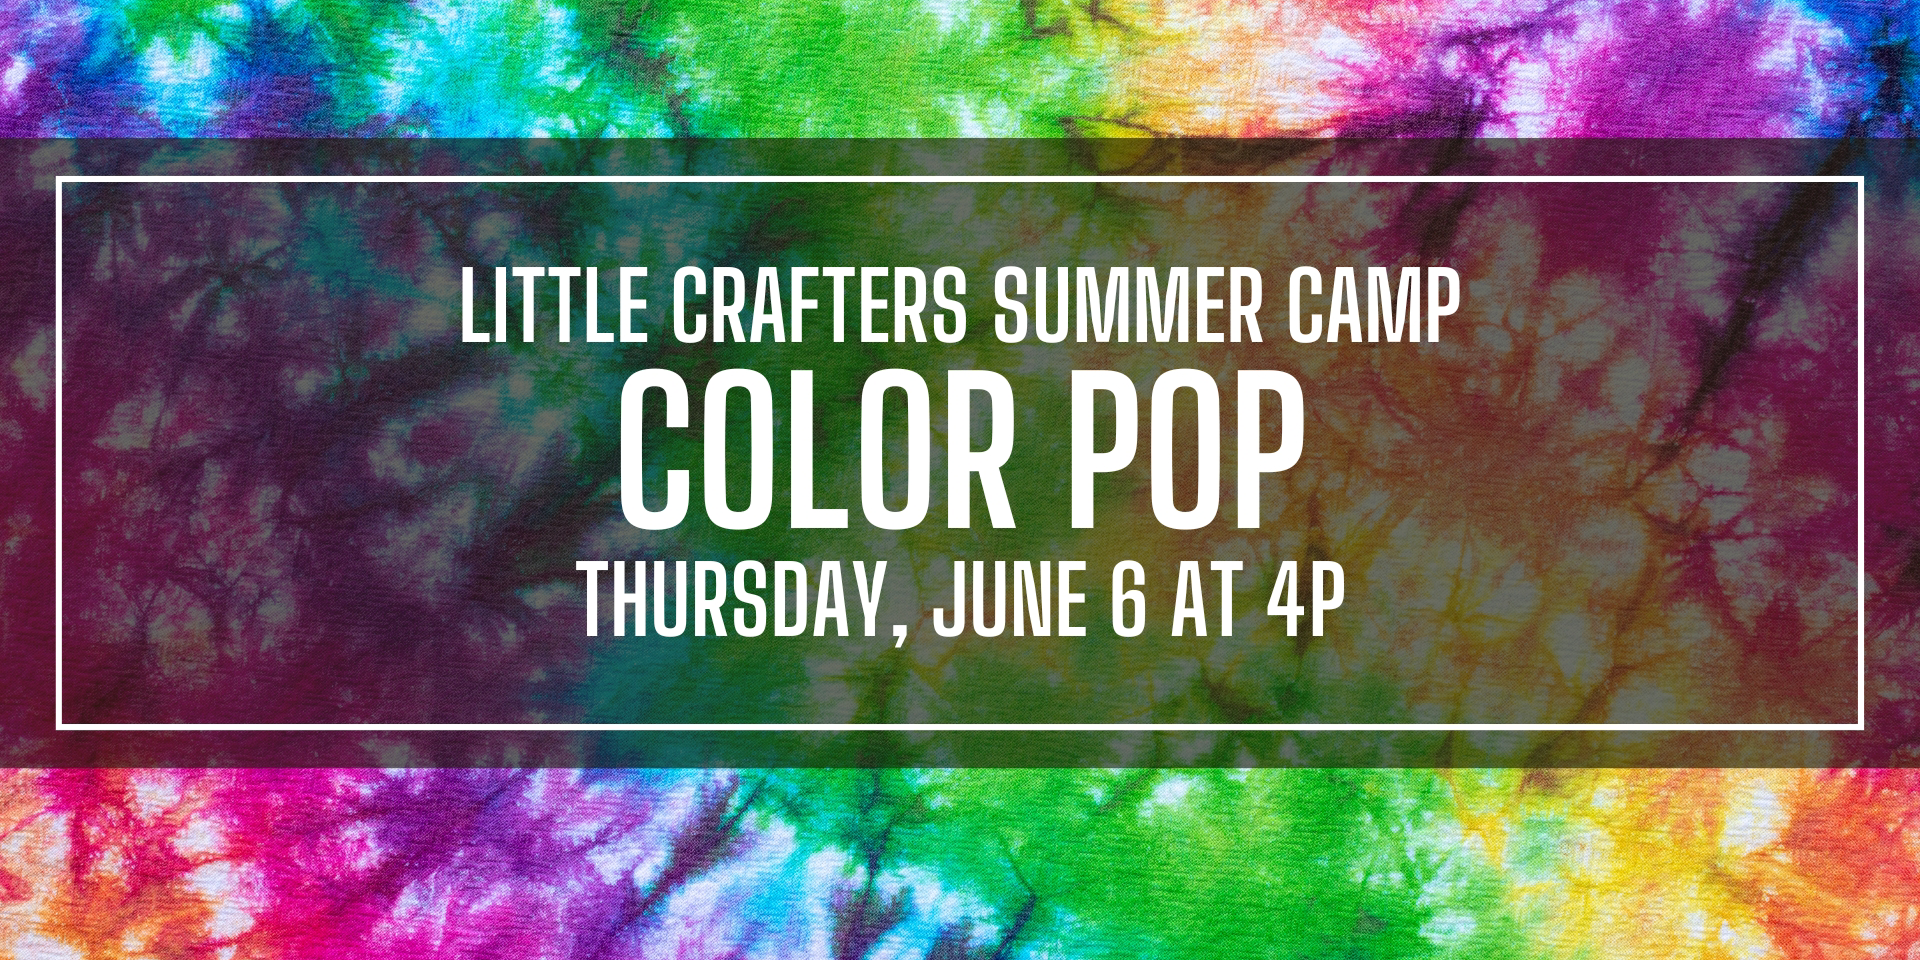 Little Crafters Summer Camp: Color Pop